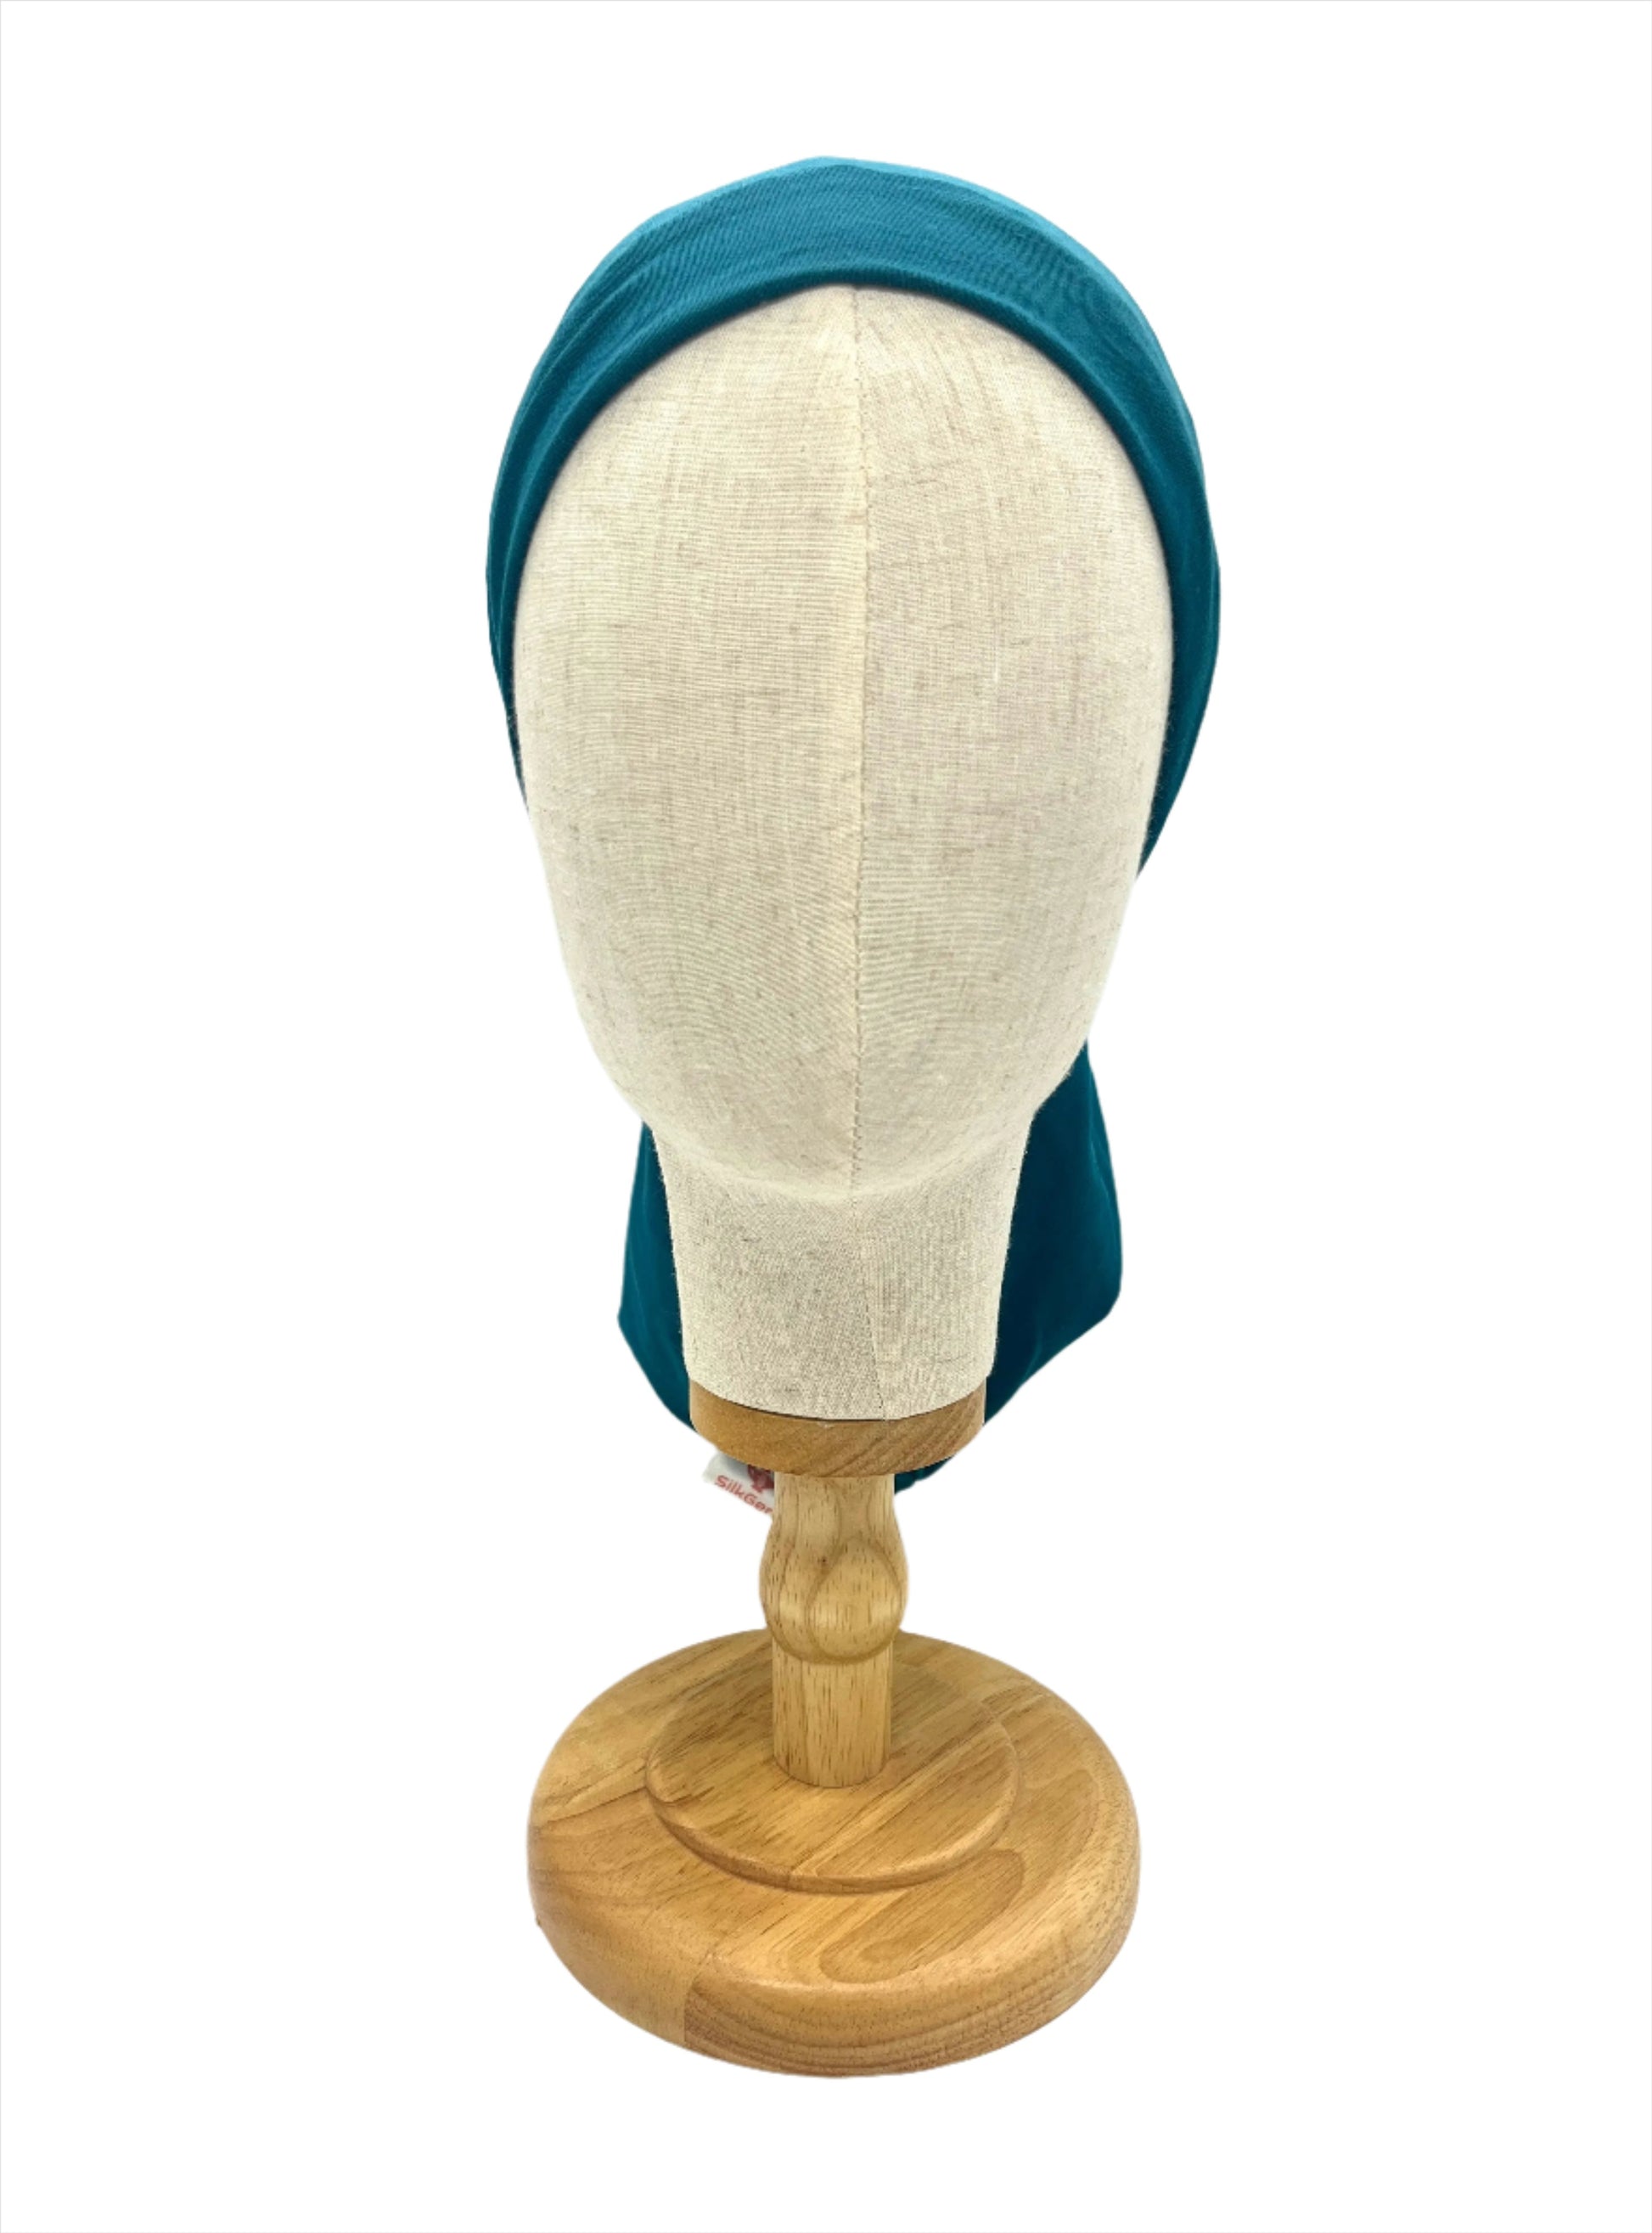 Turquoise and green silk lined bamboo hair wrap SilkGenie